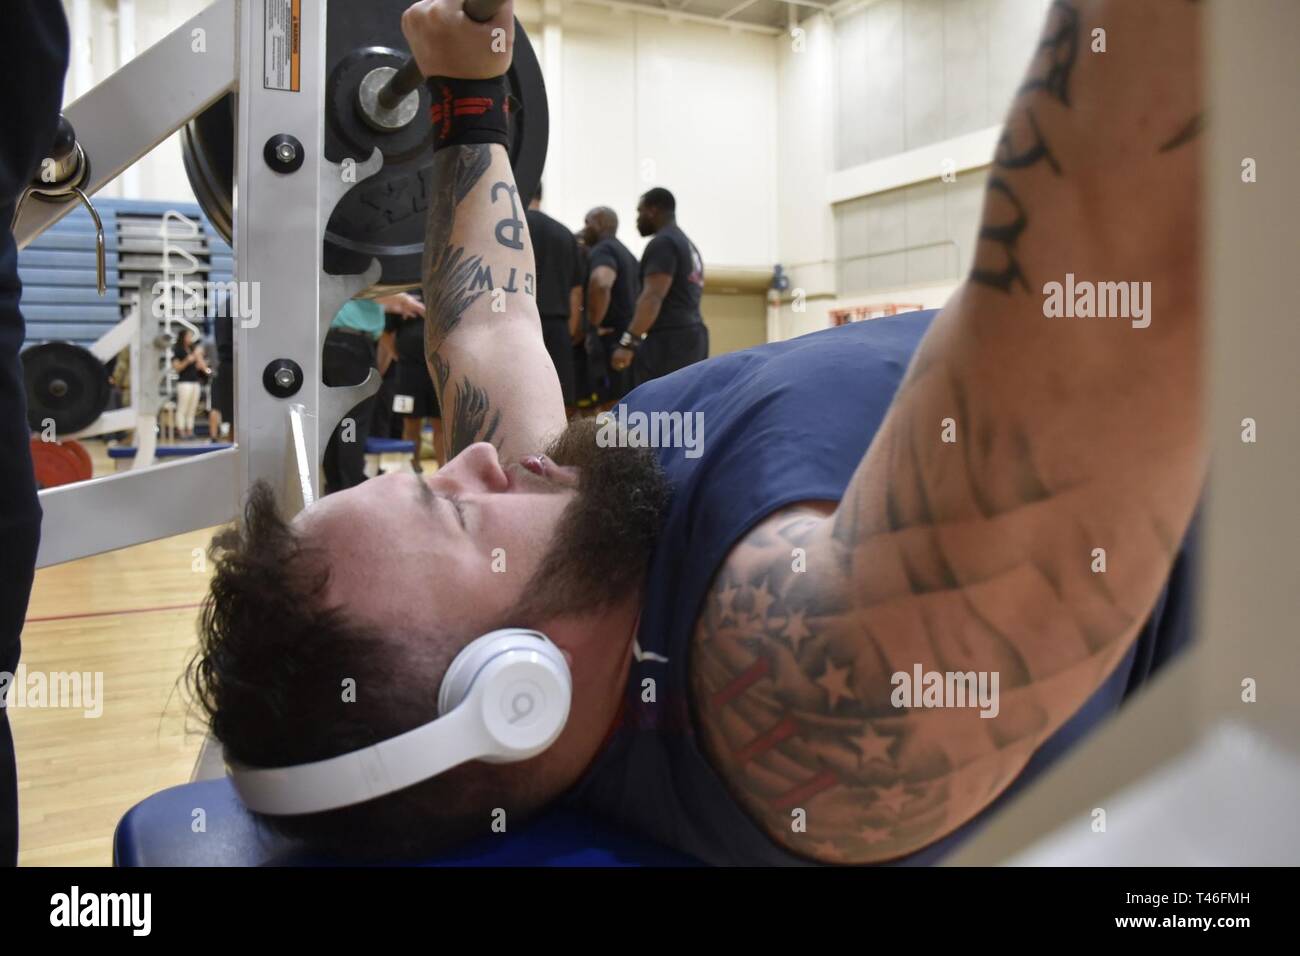 Staff Sgt. retired Ross Alewine warms up prior to the powerlifting competition during the 2019 Army Trials, at Fort Bliss, Texas, Mar. 8. The 2019 Army Trials at Fort Bliss, Texas is an adaptive sports competition from Mar. 5-16 with over 100 wounded, ill and injured active-duty Soldiers and veterans competing in 14 different sports for the opportunity to represent Team Army at the 2019 Department of Defense Warrior Games in Tampa, Florida. Stock Photo